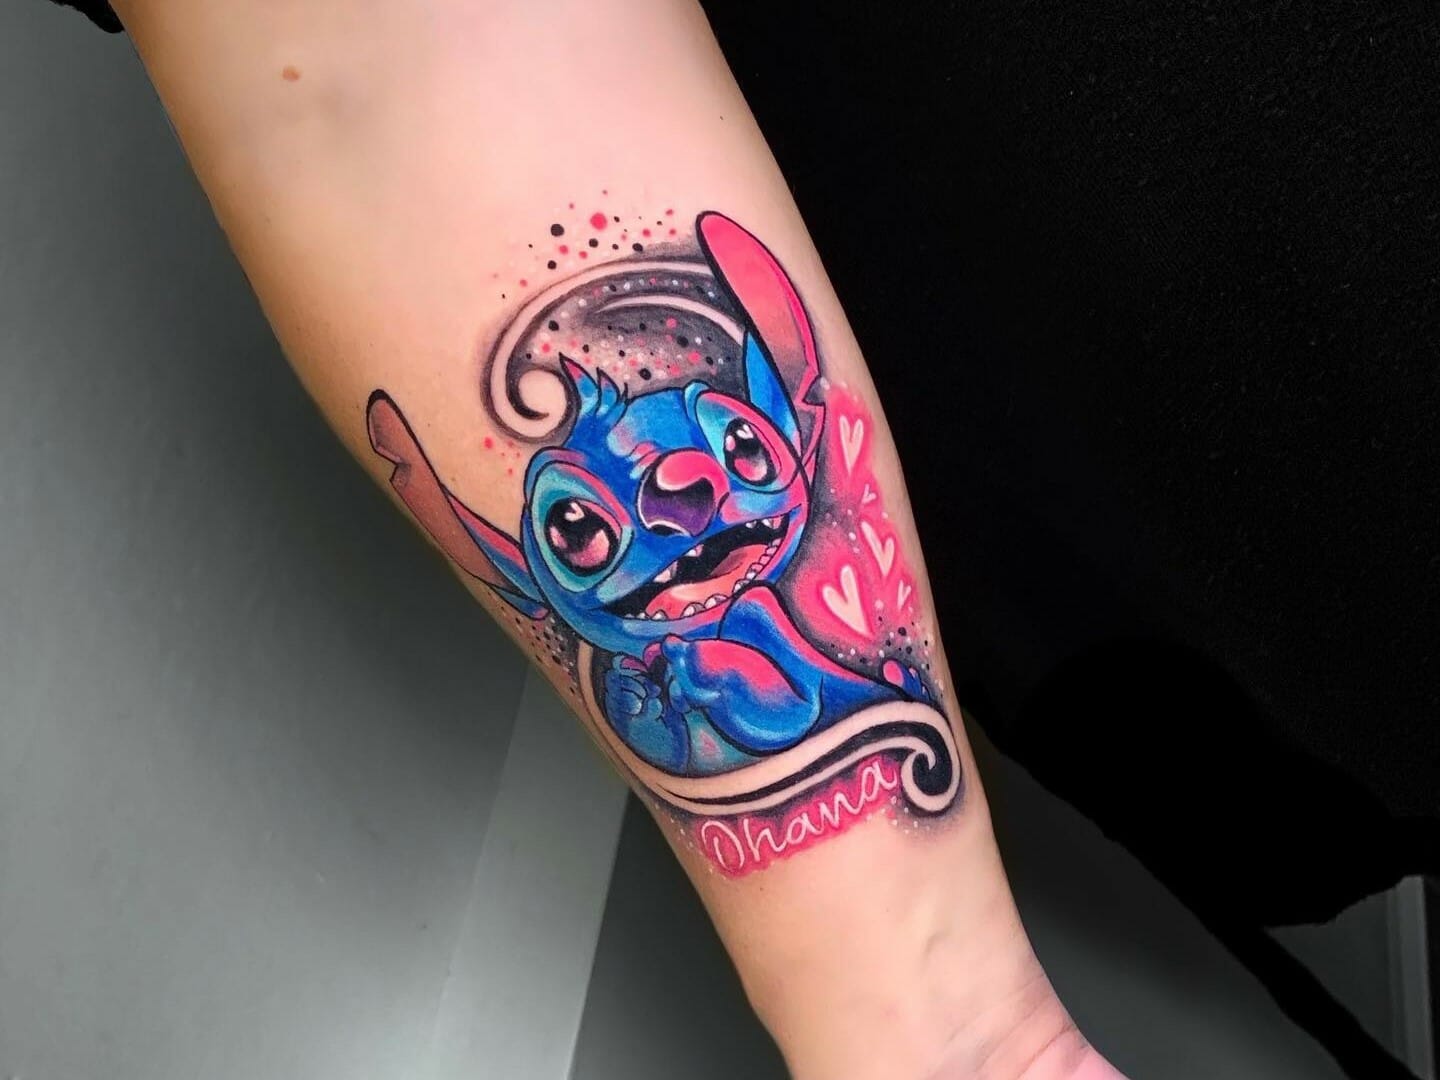 Stitch tattoo on the inner forearm